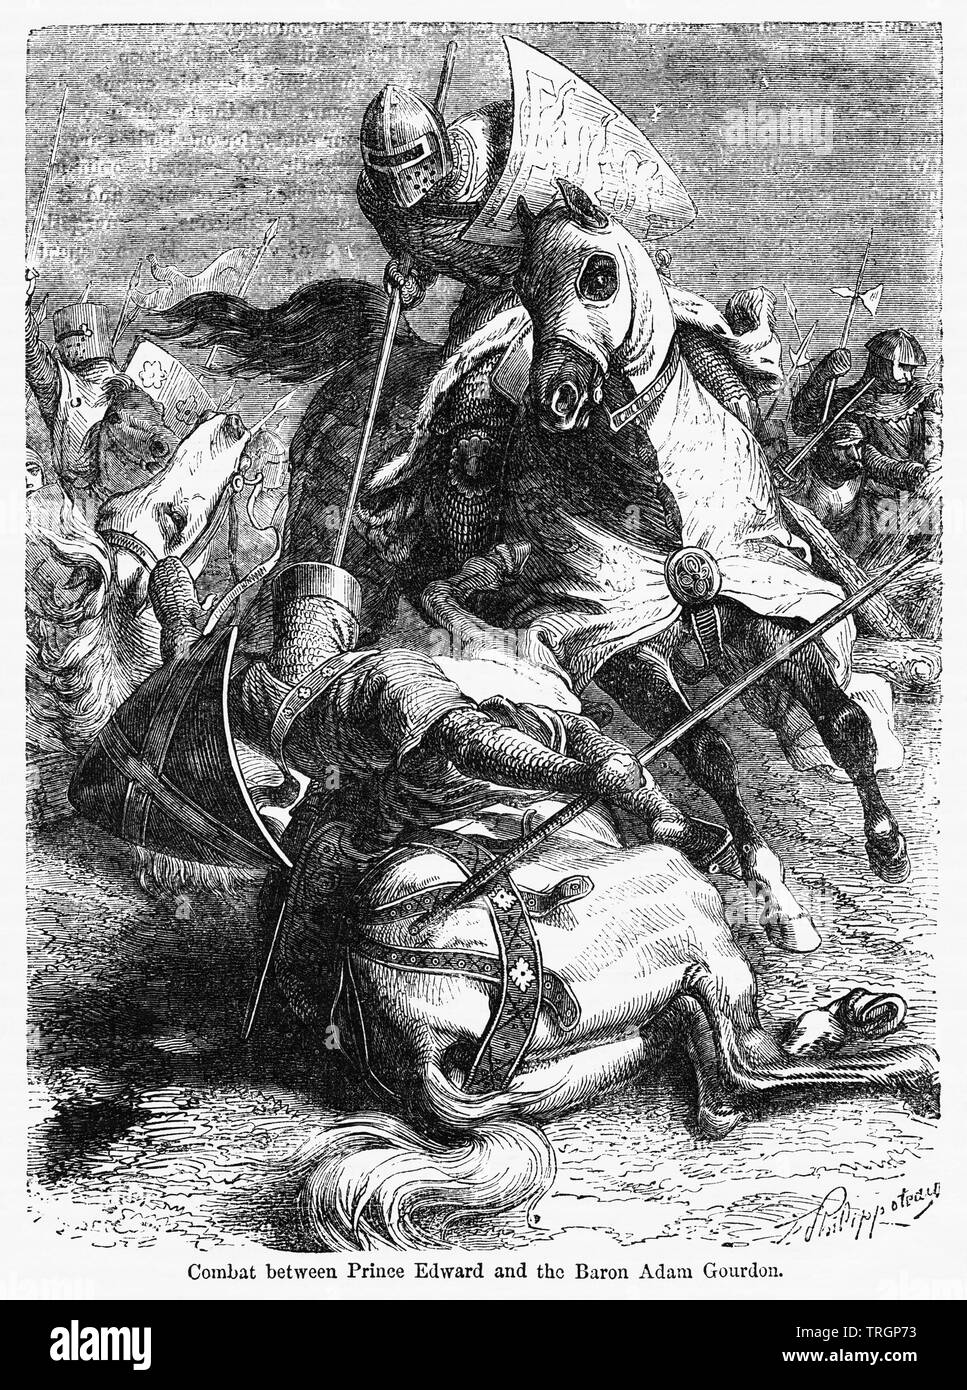 Combat between Prince Edward and the Baron Adam Gourdon, Illustration from John Cassell's Illustrated History of England, Vol. I from the earliest period to the reign of Edward the Fourth, Cassell, Petter and Galpin, 1857 Stock Photo